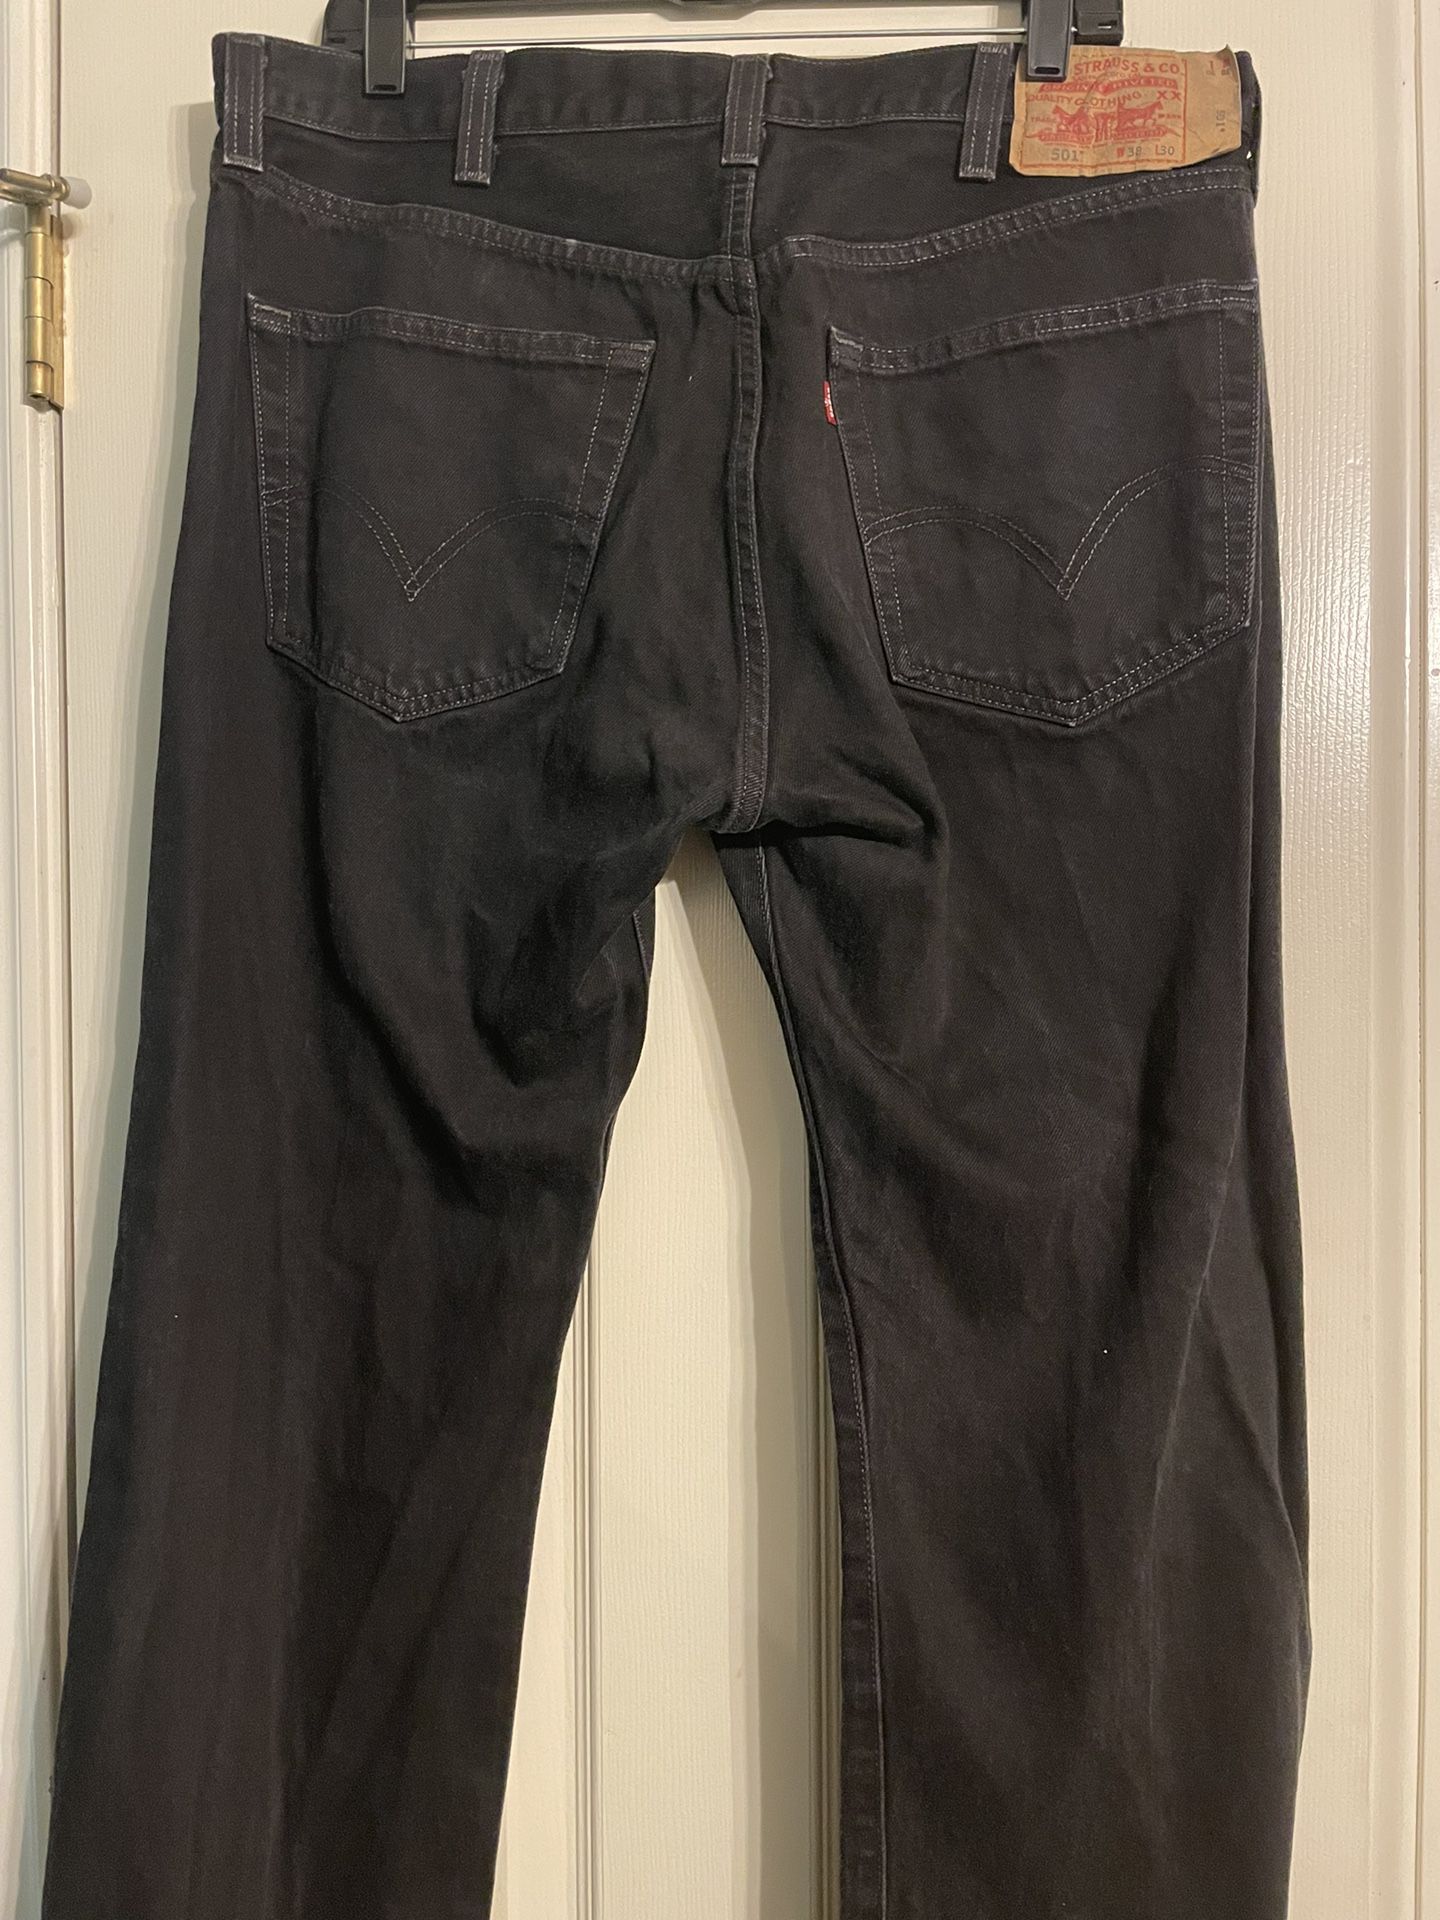 $10 For All 5 pair of 38w Jeans & Pants - Calvin Klein, Levis & More